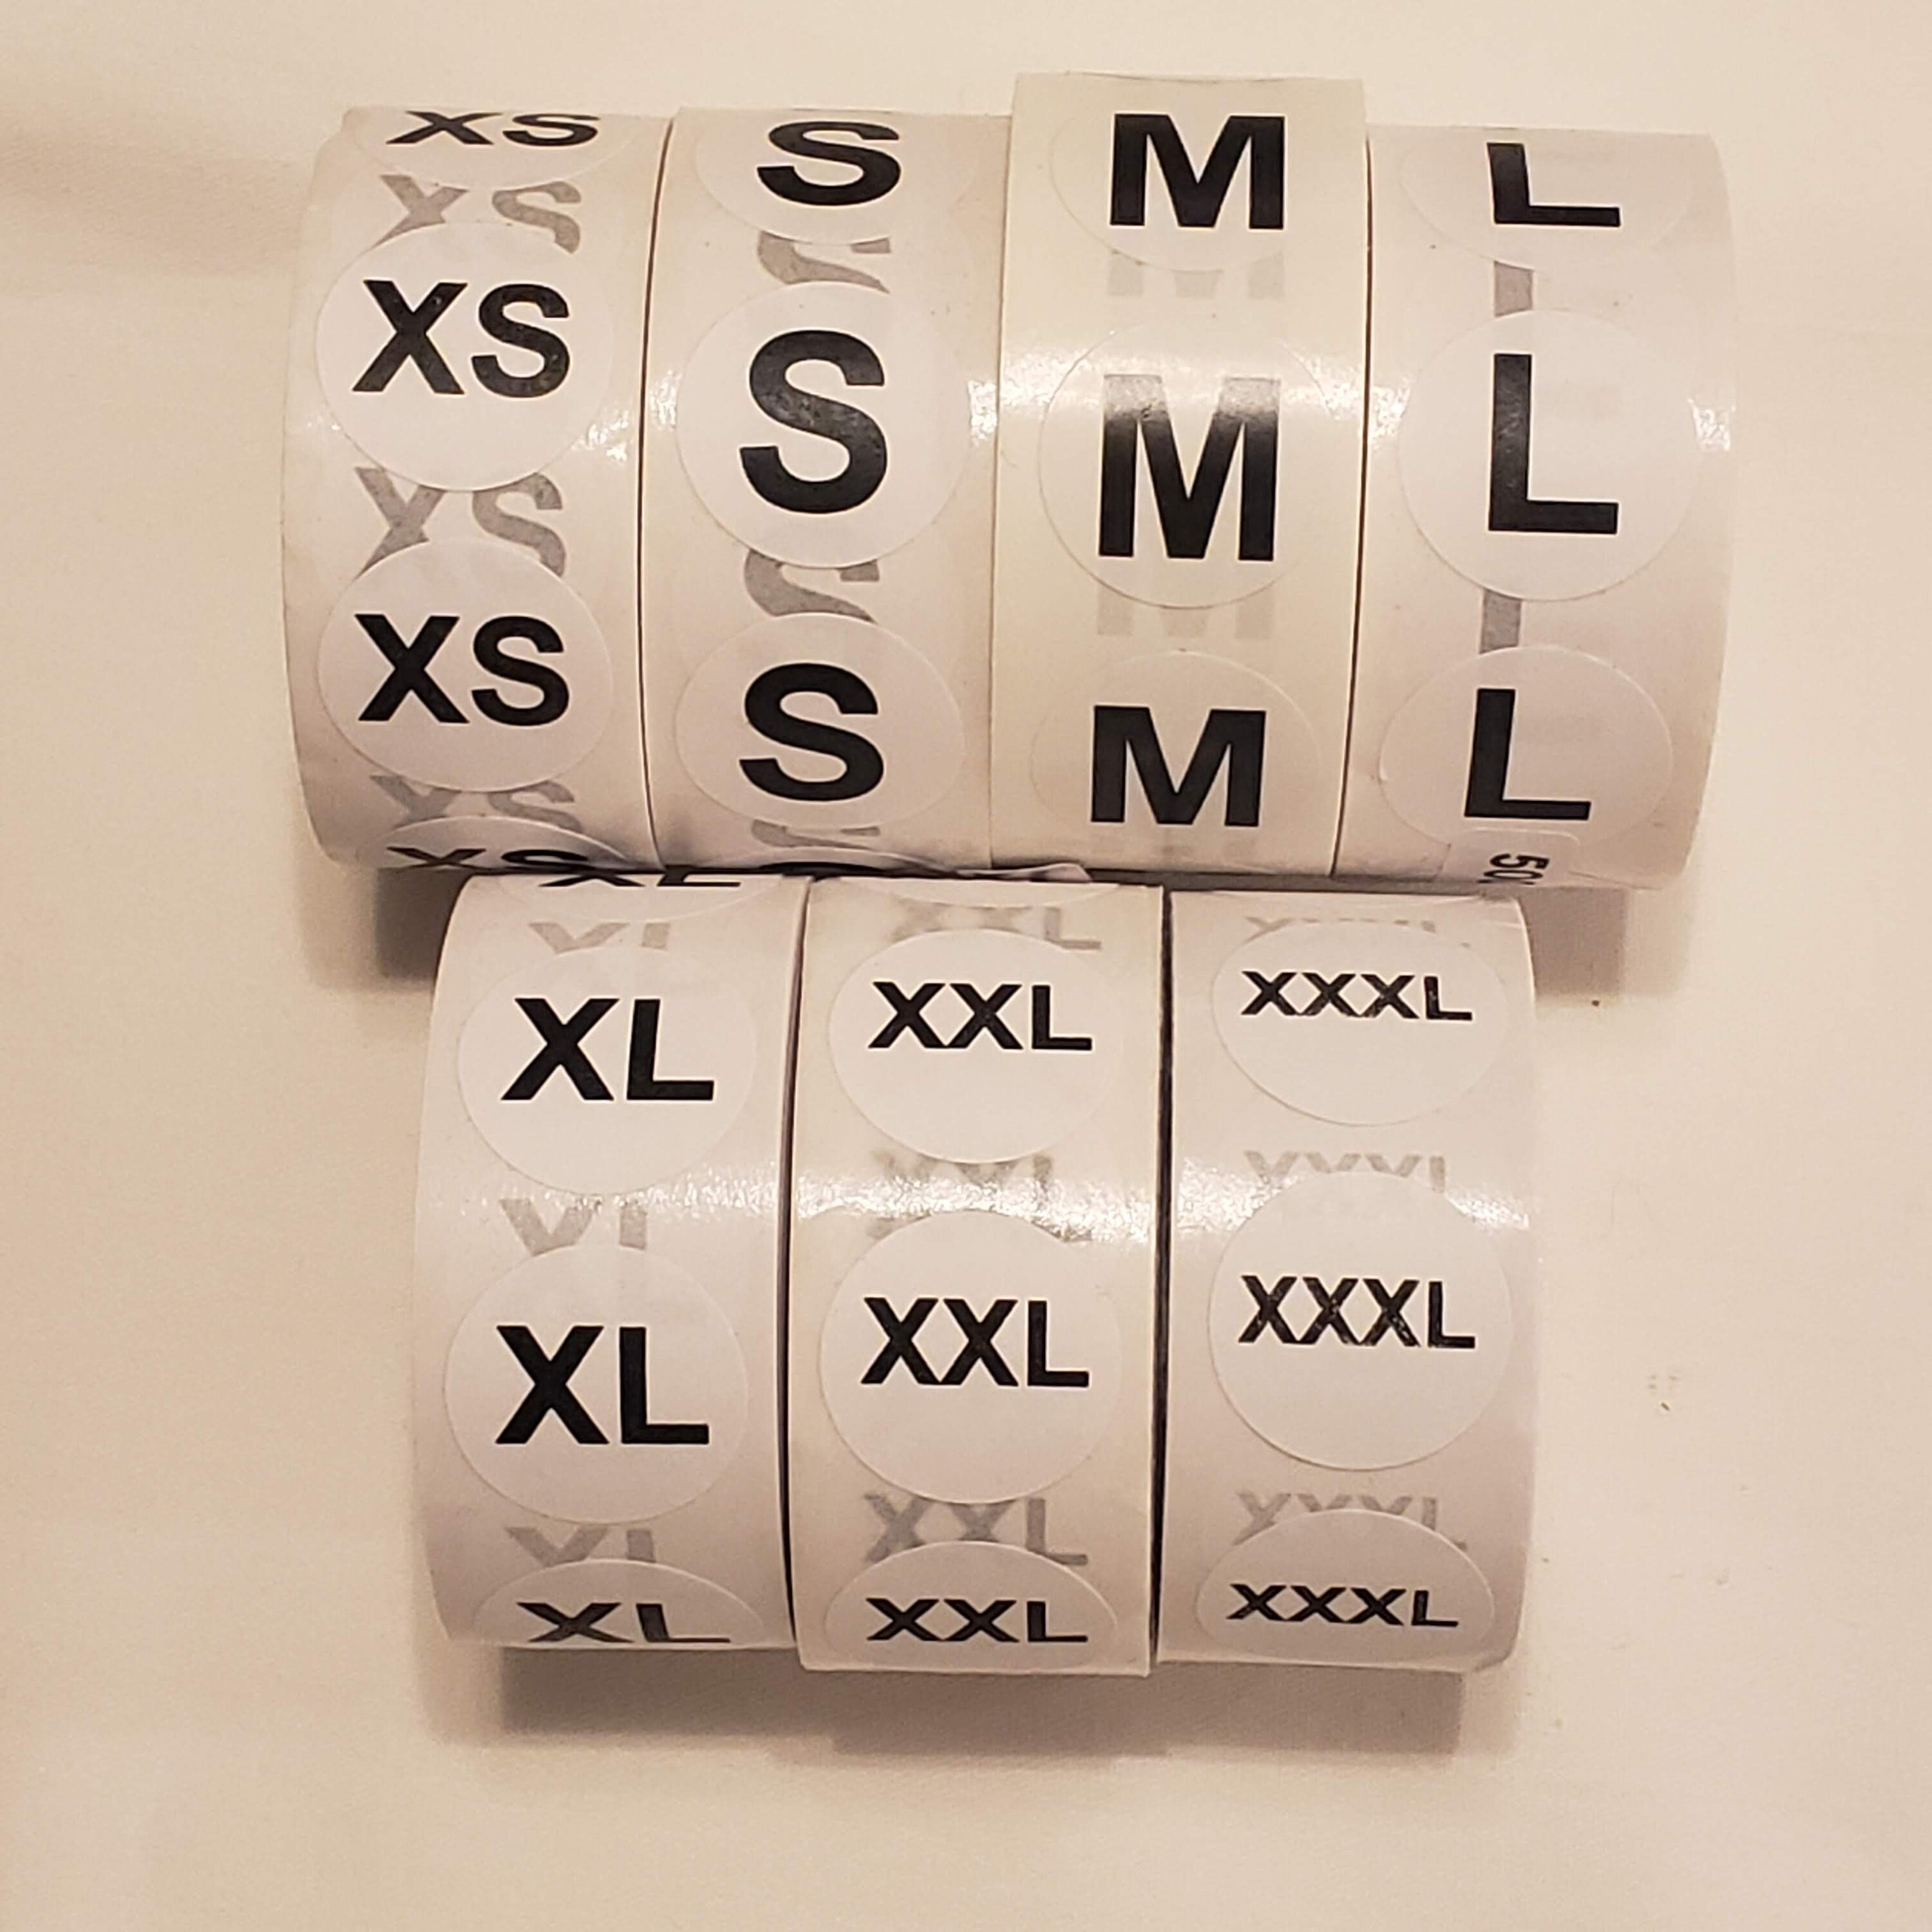 XL M 6 Rolls 6 Sizes S XS L Yellow, Blue, Purple, Pink, Green, Red with Black Word XXL 3000 Pieces Clothing Size Sticker Labels 7/8 Inch Coded Adhesive Labels Round Clothing Sticker Labels 